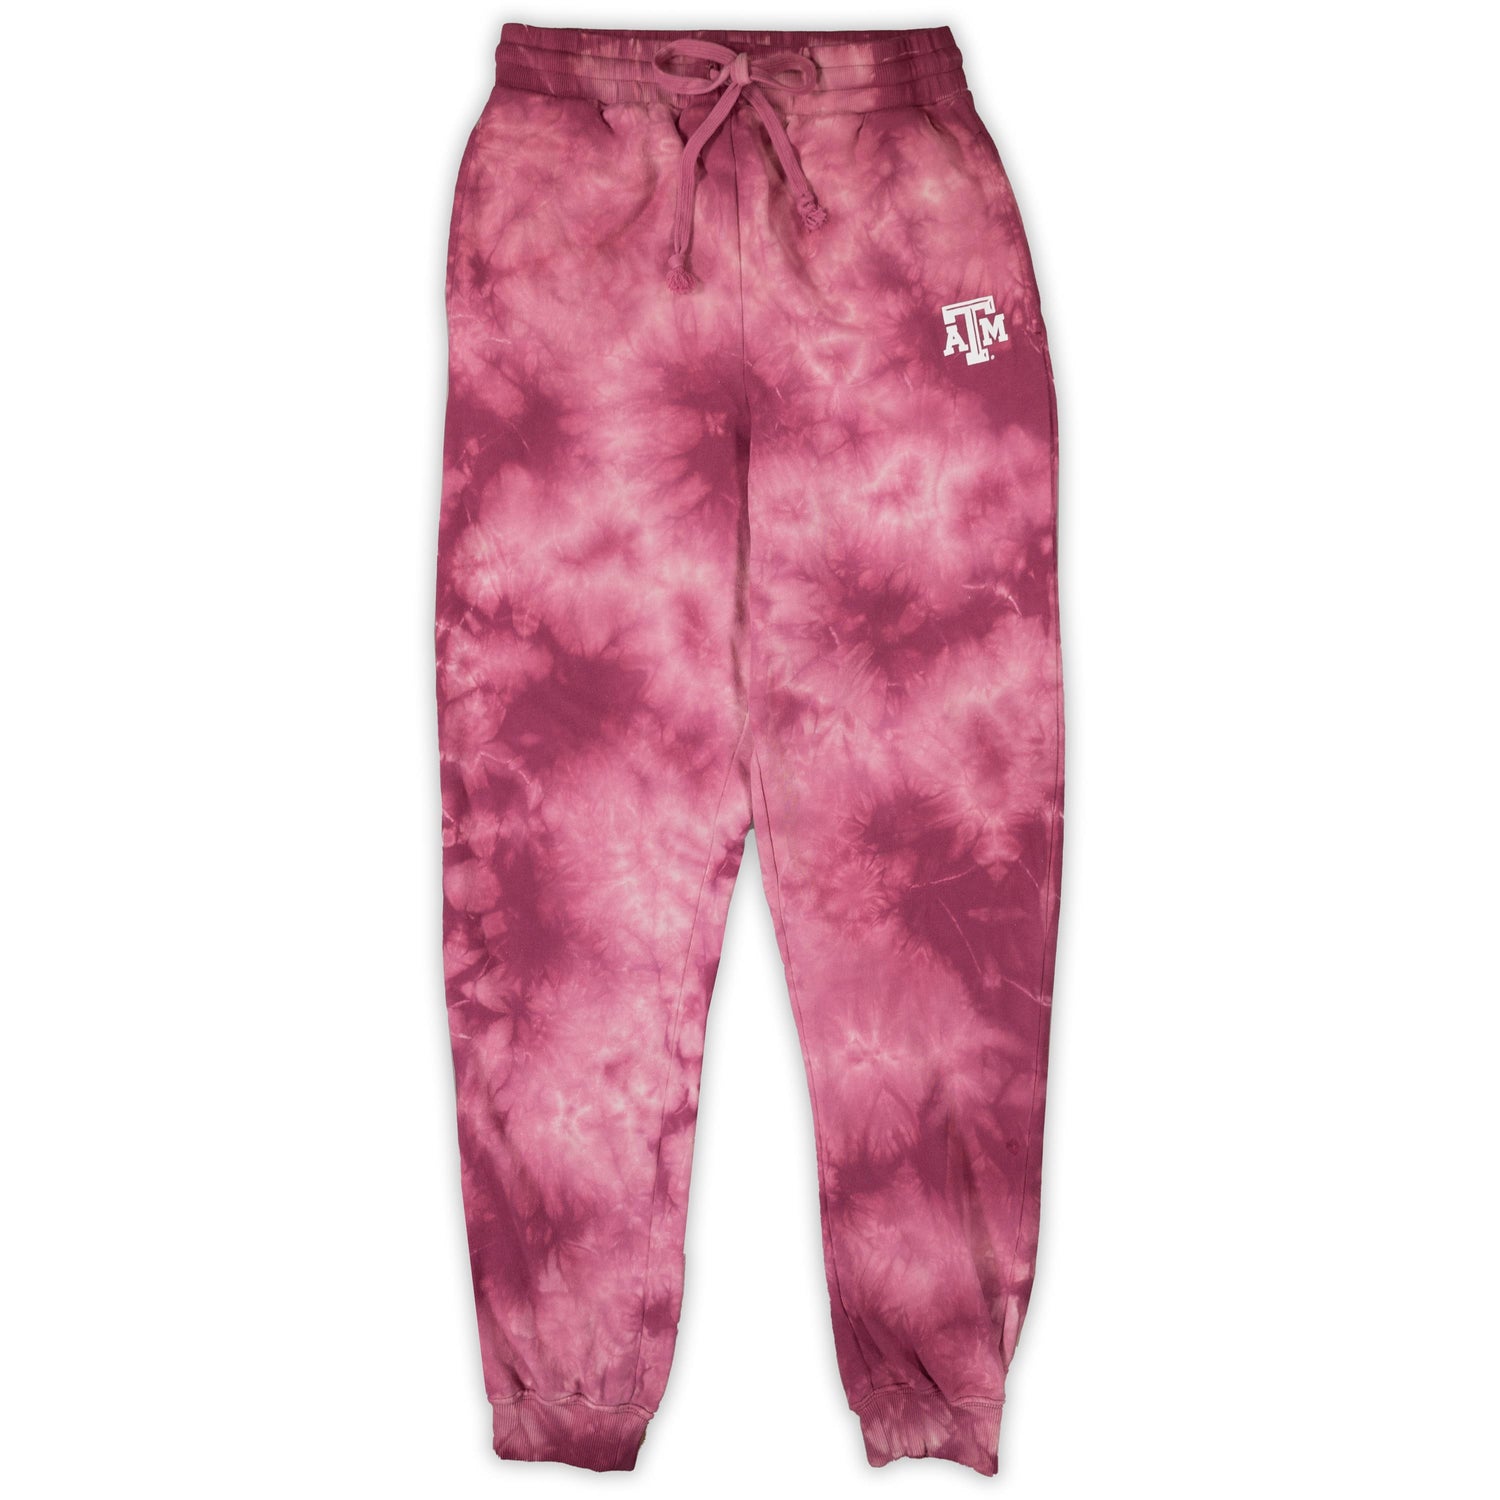 Cloud Dye French Terry Jogger